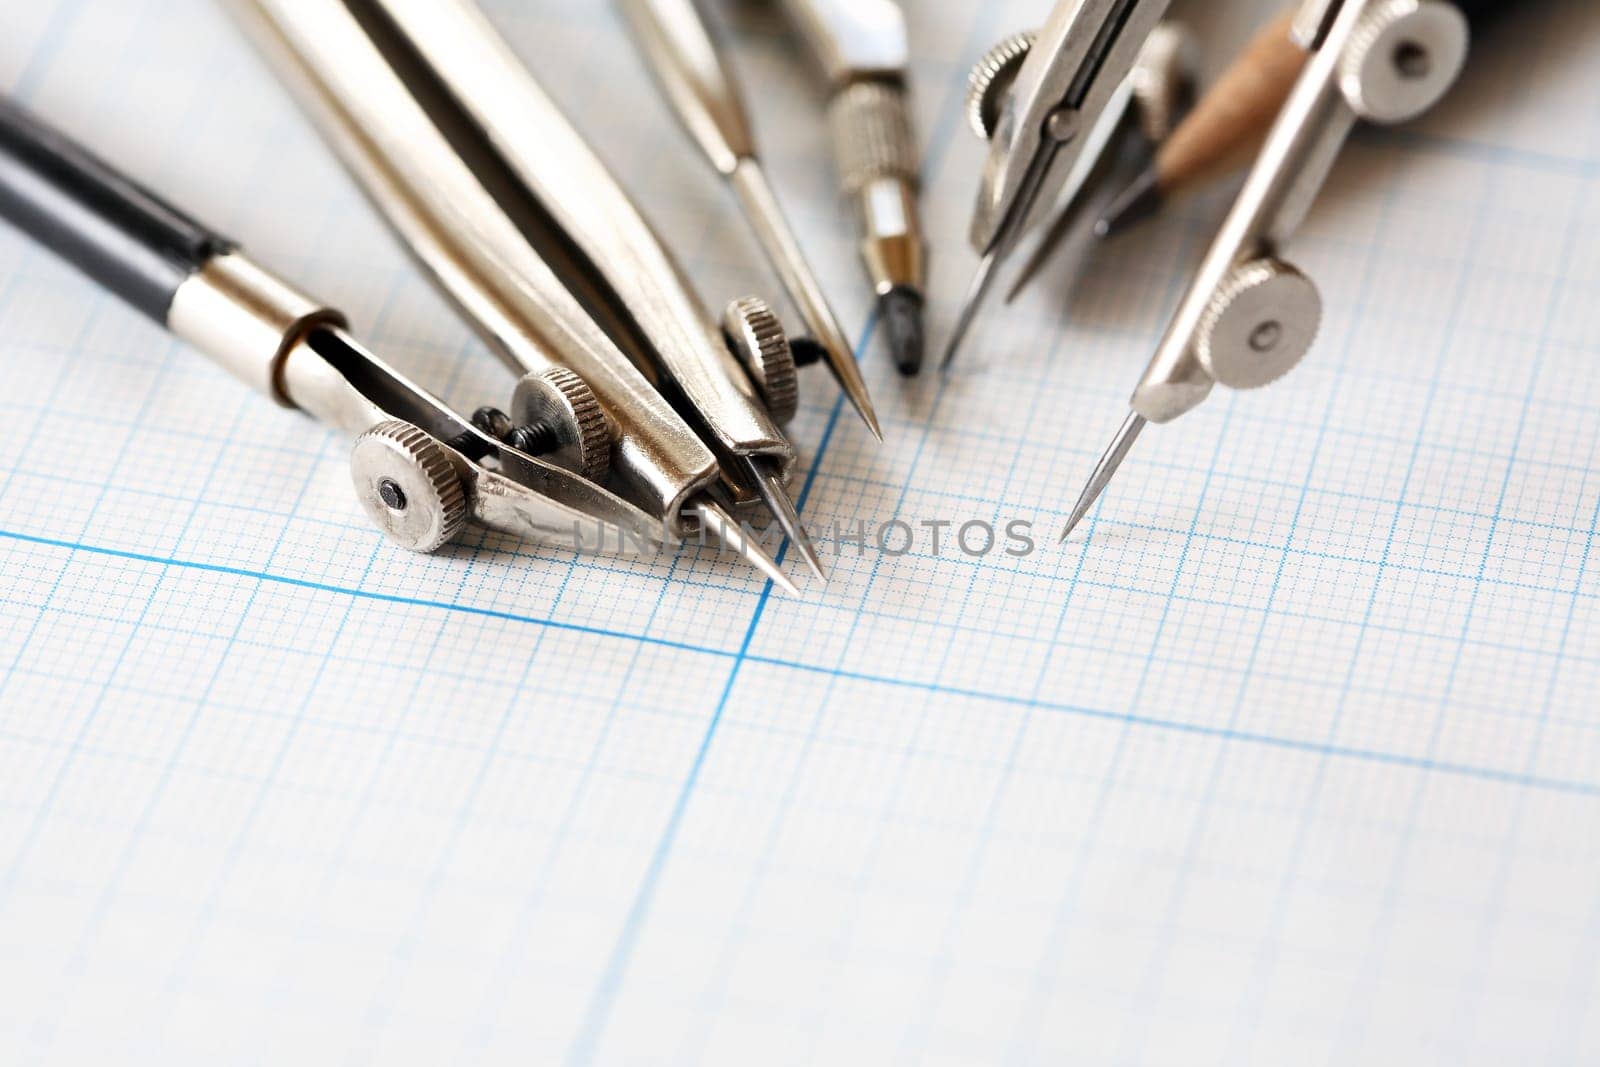 Set of old drawing tools on background with graph paper